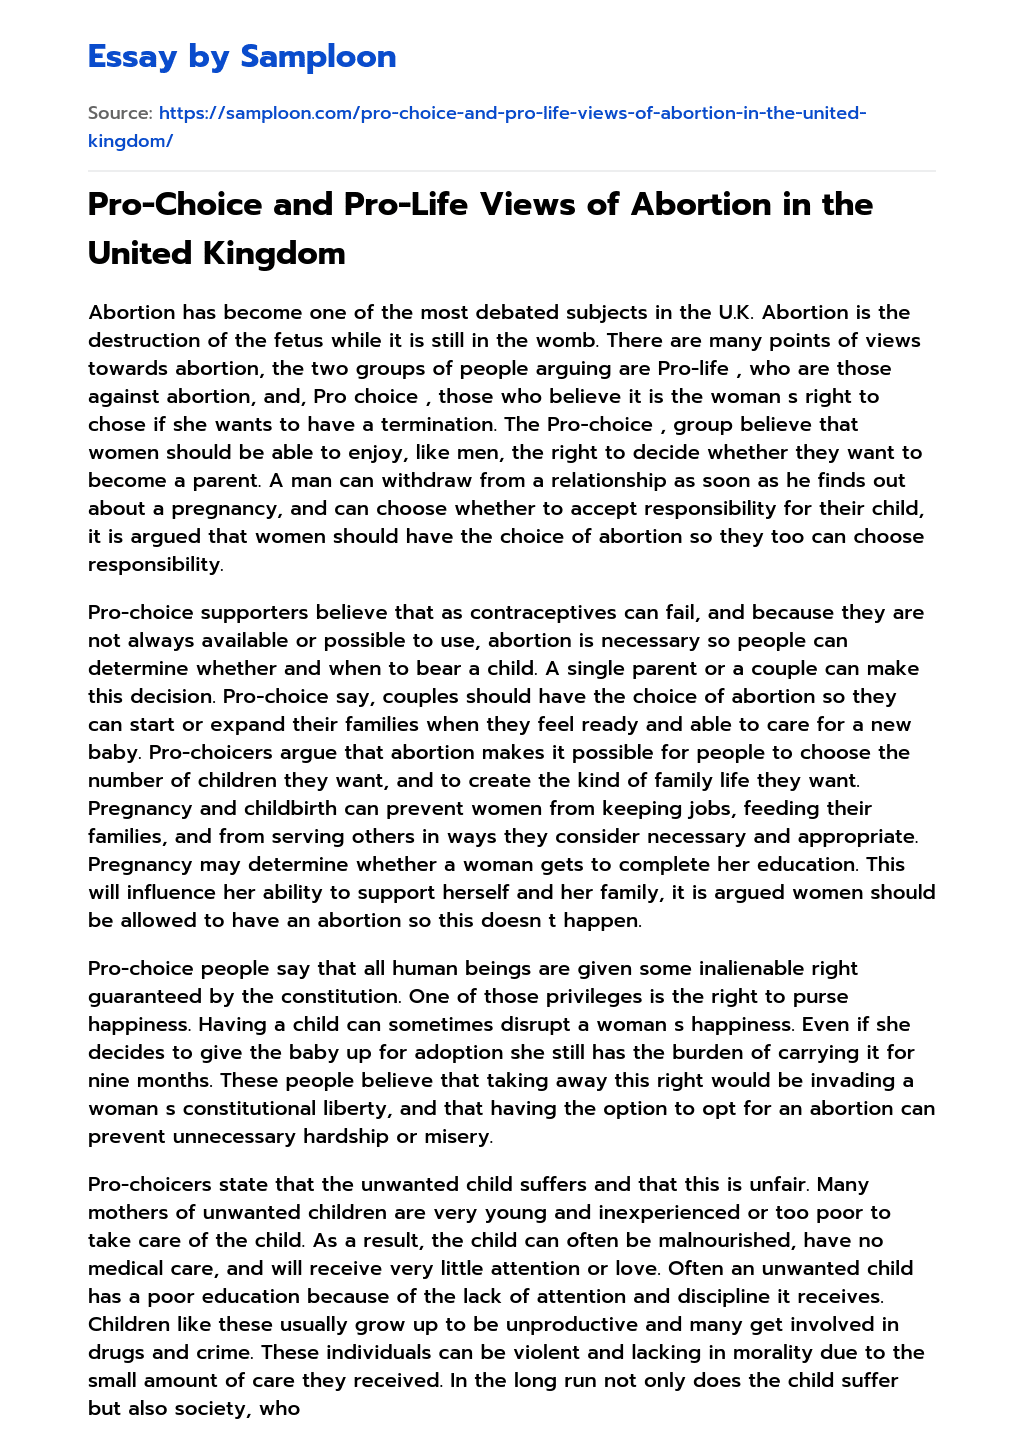 Pro-Choice and Pro-Life Views of Abortion in the United Kingdom essay